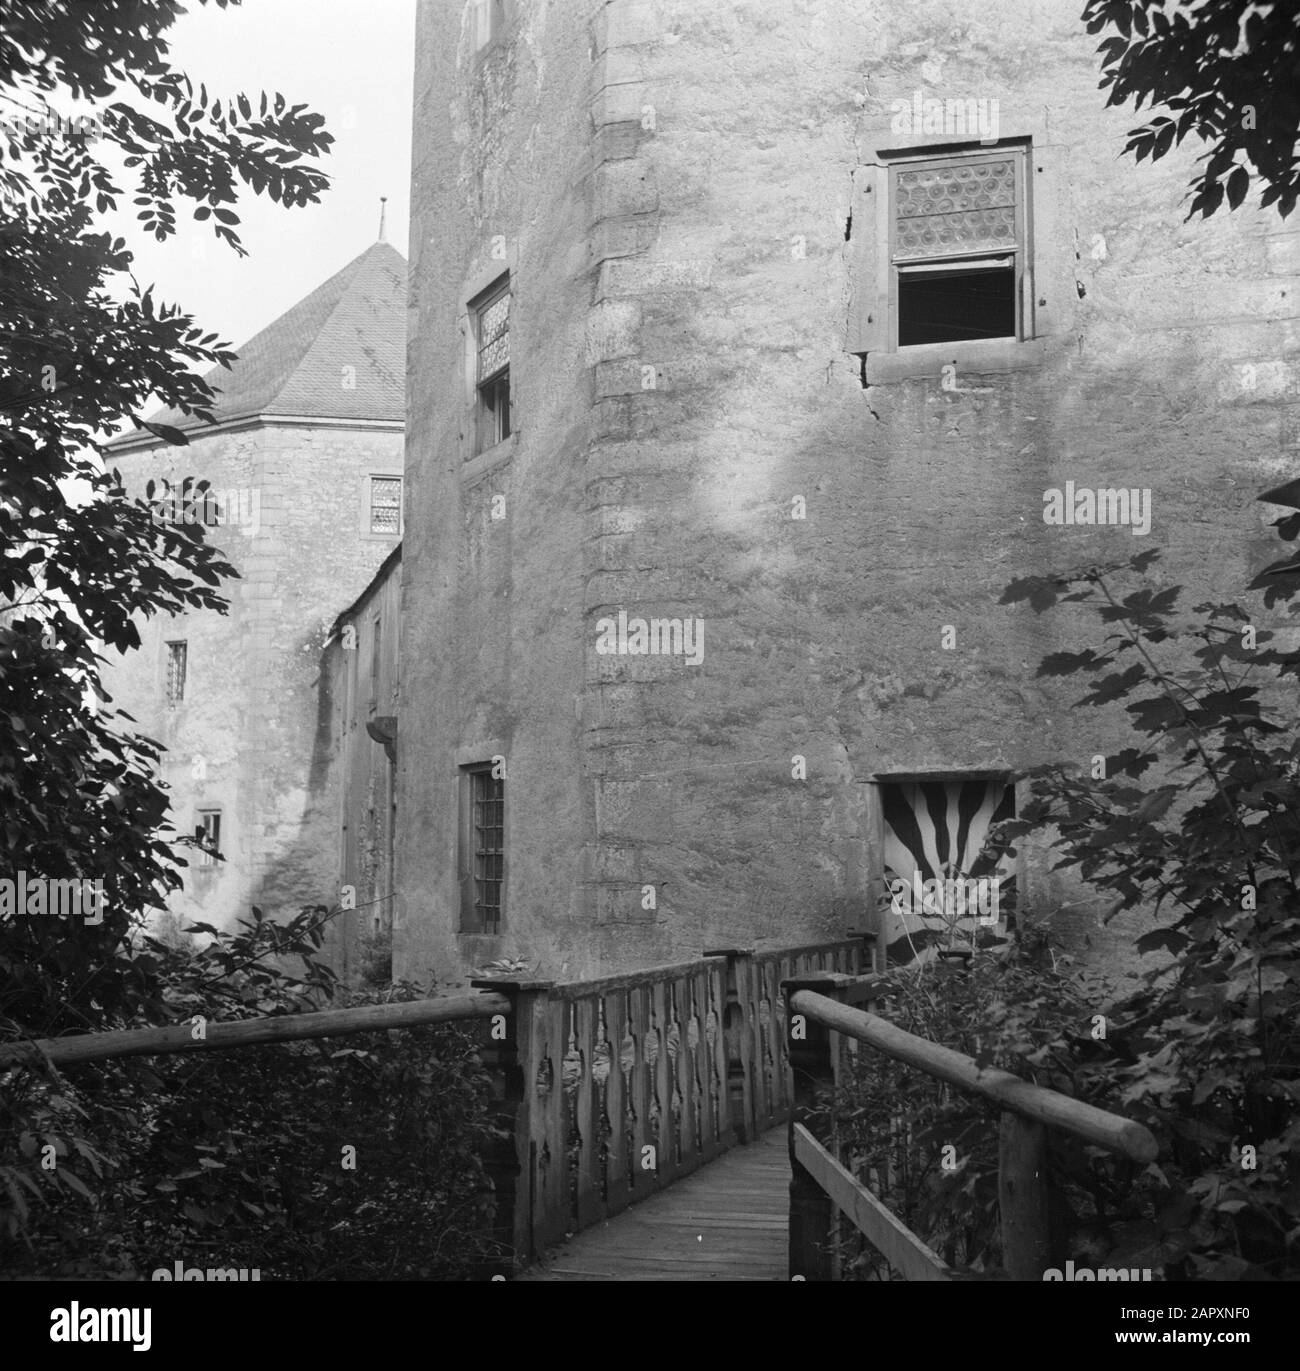 Schöntal  tower and walls of Jagsthausen Castle Date: 1954 Location: Baden-Württemberg, Germany, Schöntal (Jagst), West Germany Keywords: castles, walls, towers Stock Photo